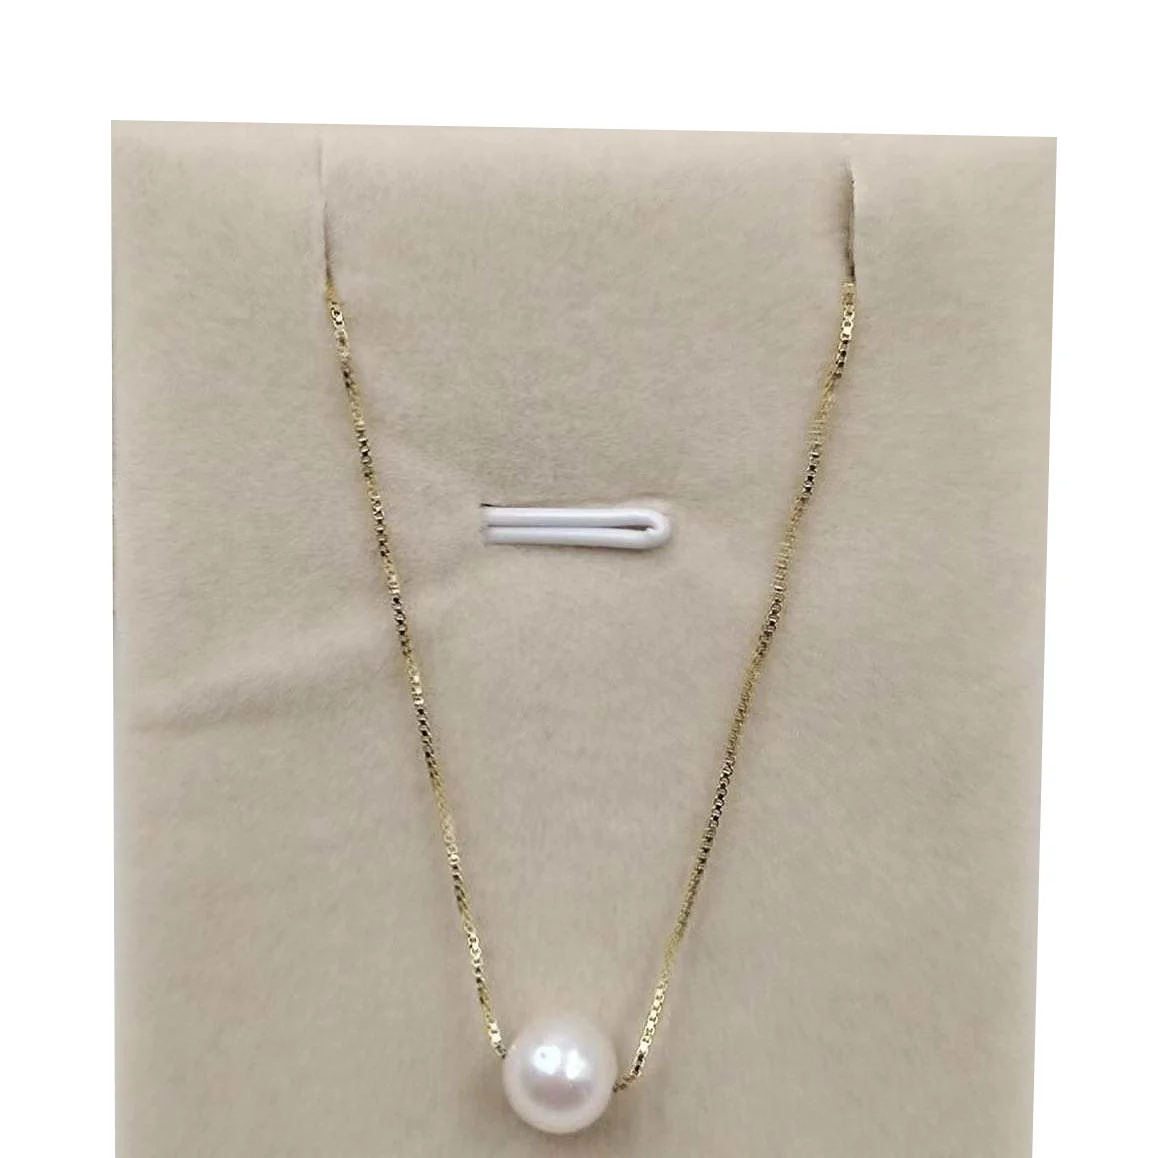 

18 inch Wholesales 925 sterling silver nature pearl floating necklace100% nature freshwater perfect round pearl pendant 8 mm